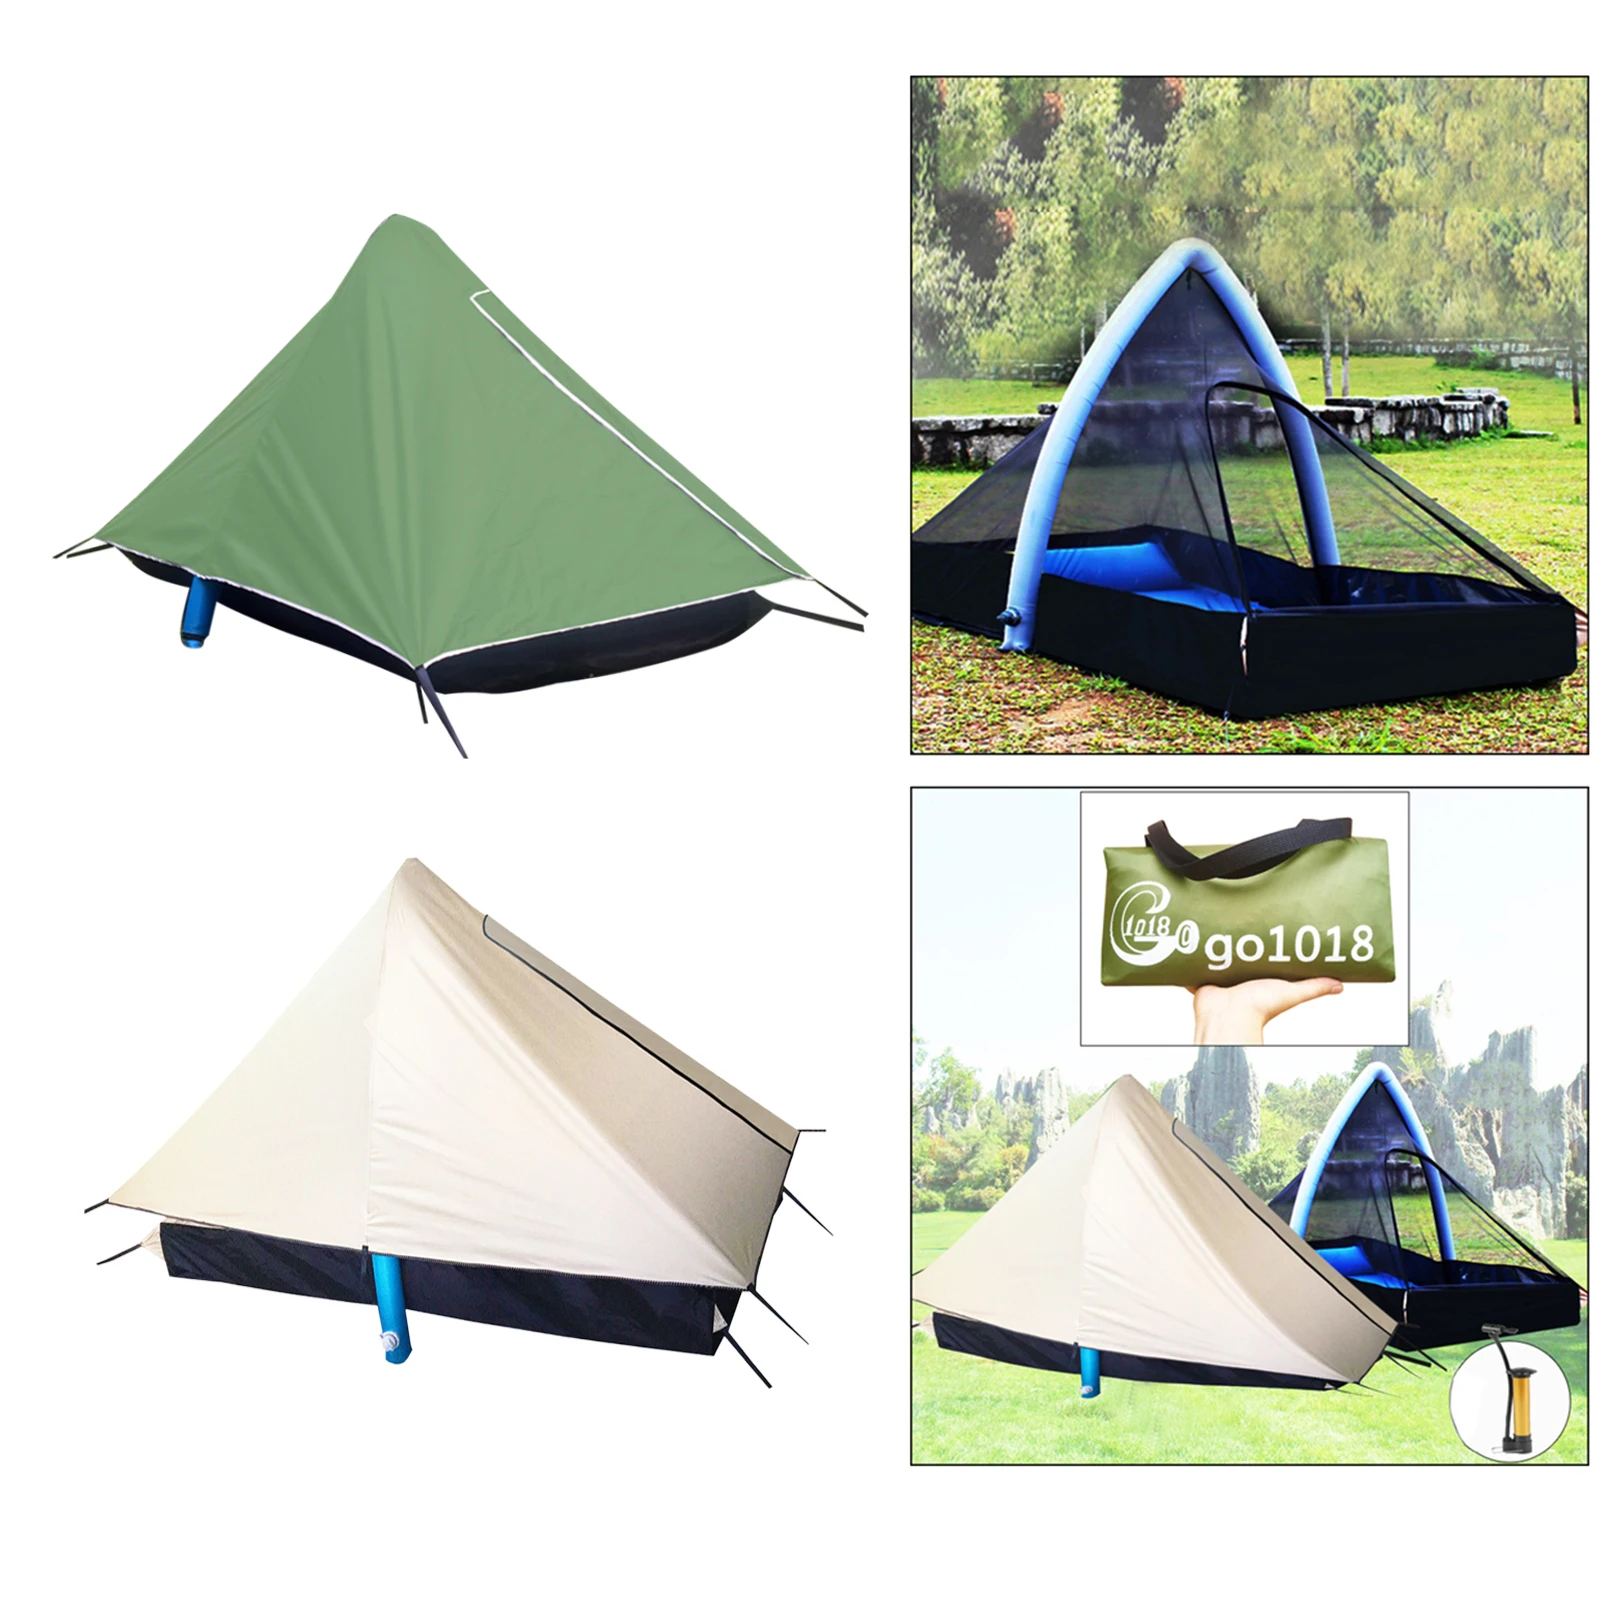 Waterproof Inflatable Single Tents Weather Pod Sun Shelter Portable 1-2 Person Tent for Adults Kids Family Camping Hunting